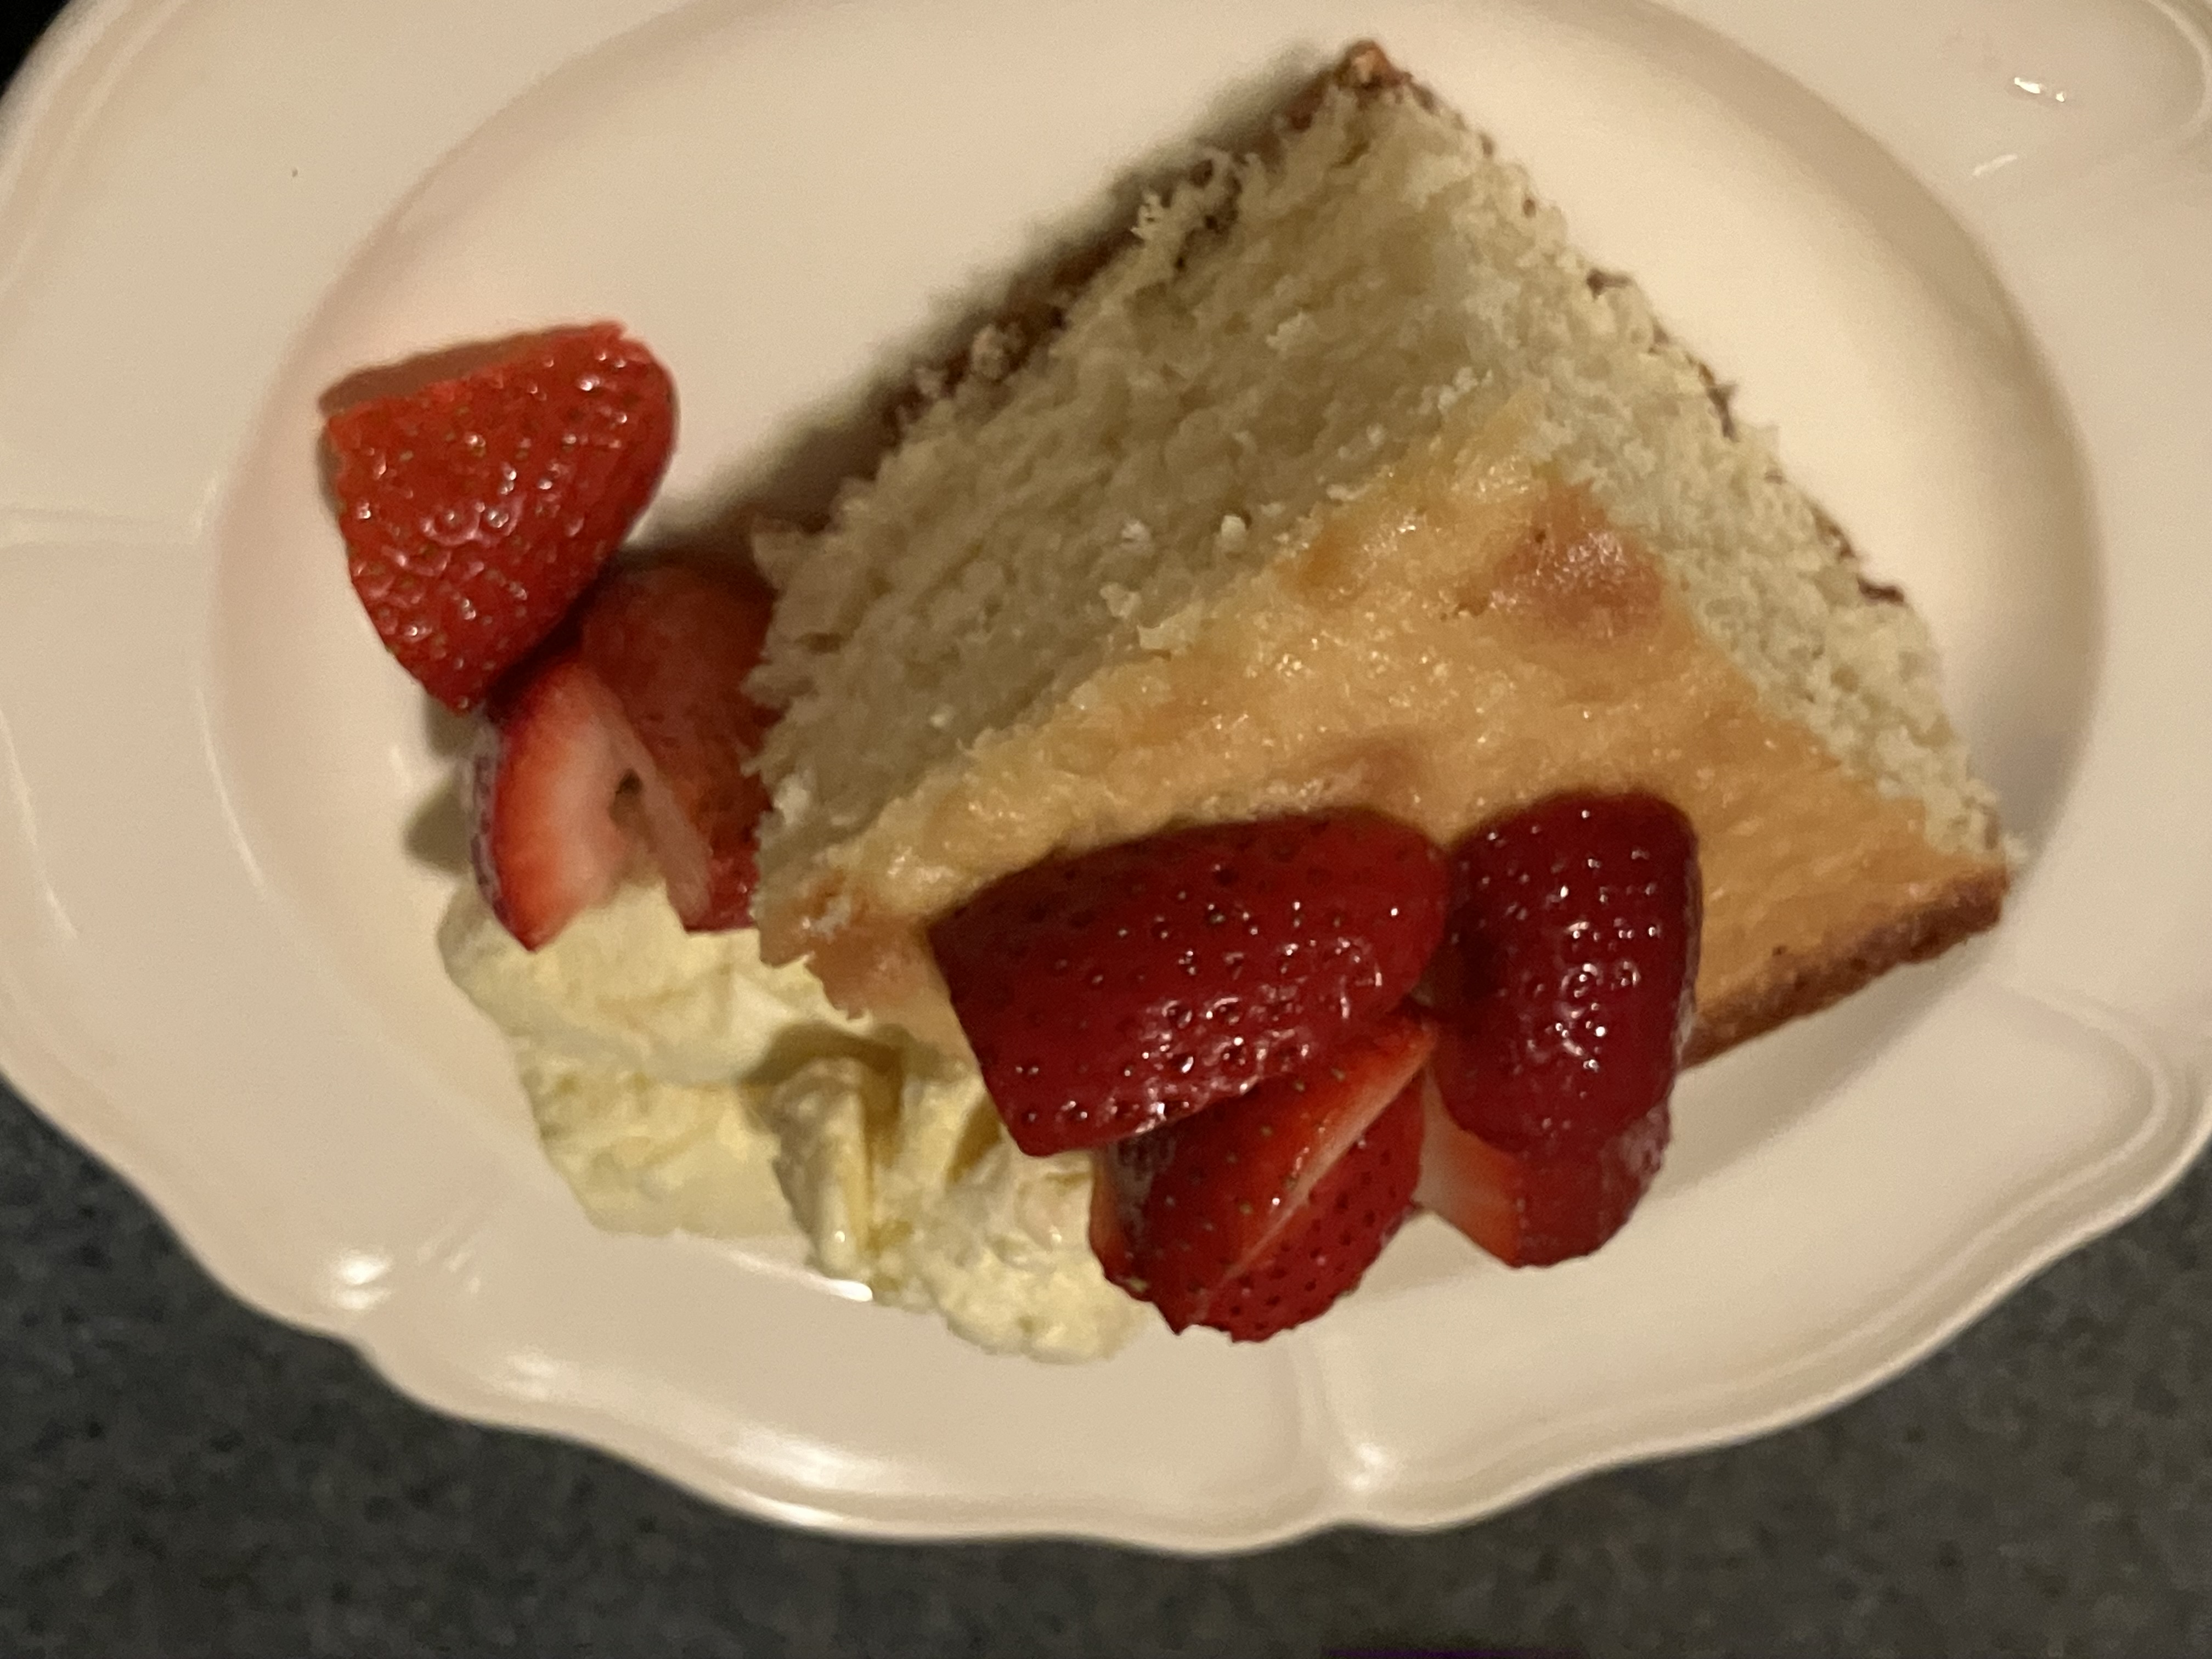 A square sliced of baked cake on a round white dish. The cake is topped with strawberry slices. Whipped cream and strawberry slices are next to the cake.